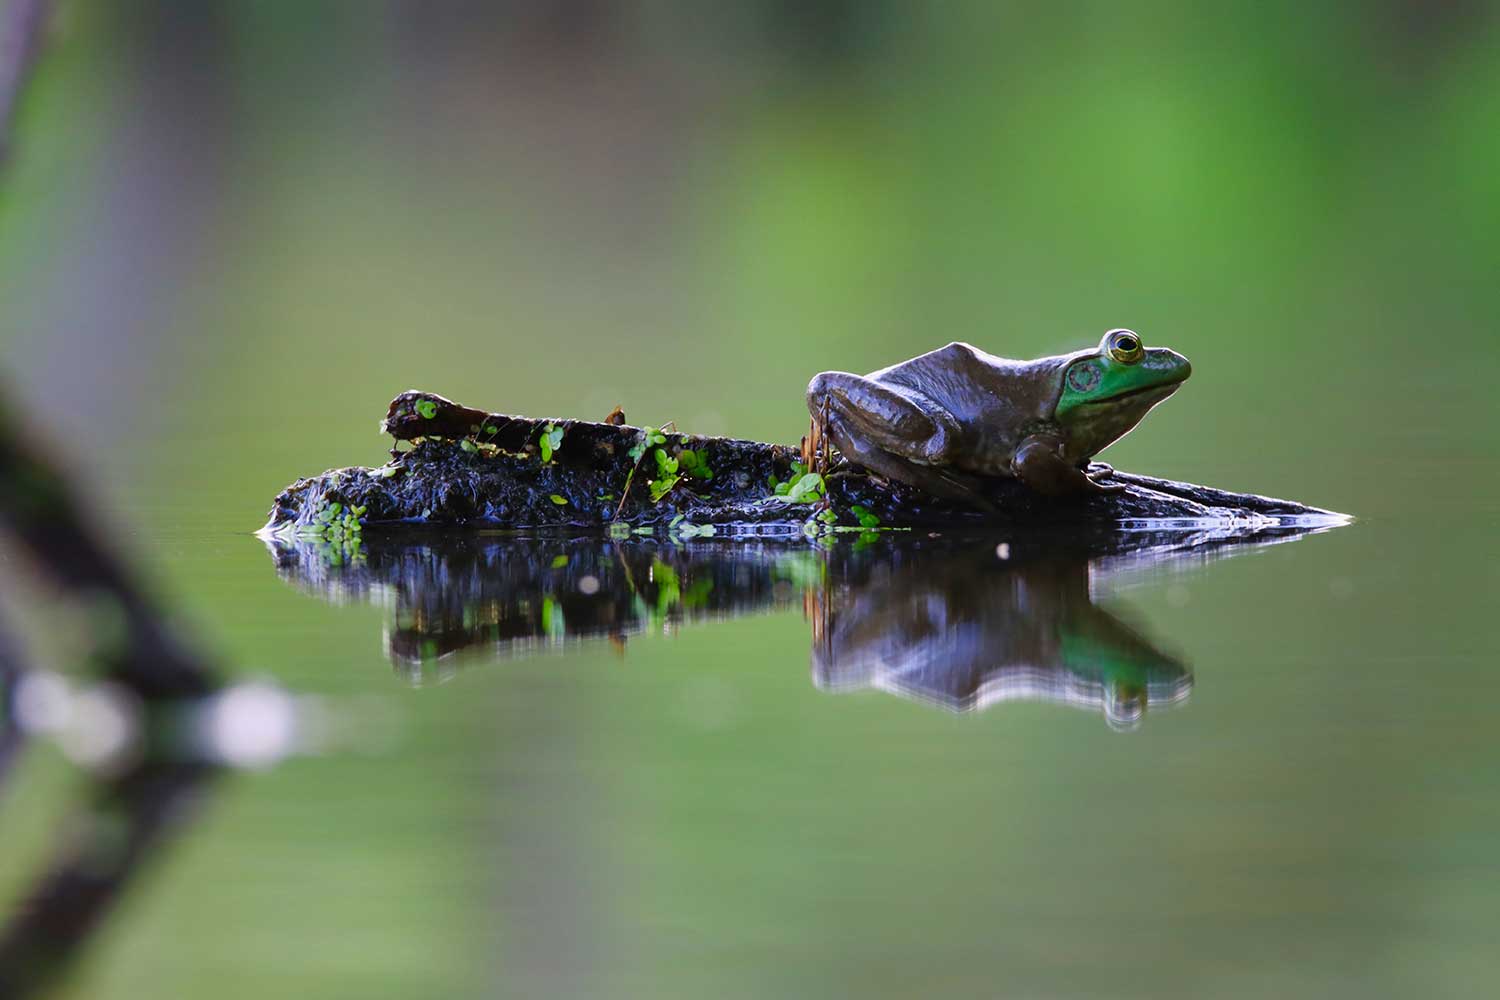 A bullfrog on a log in the water.